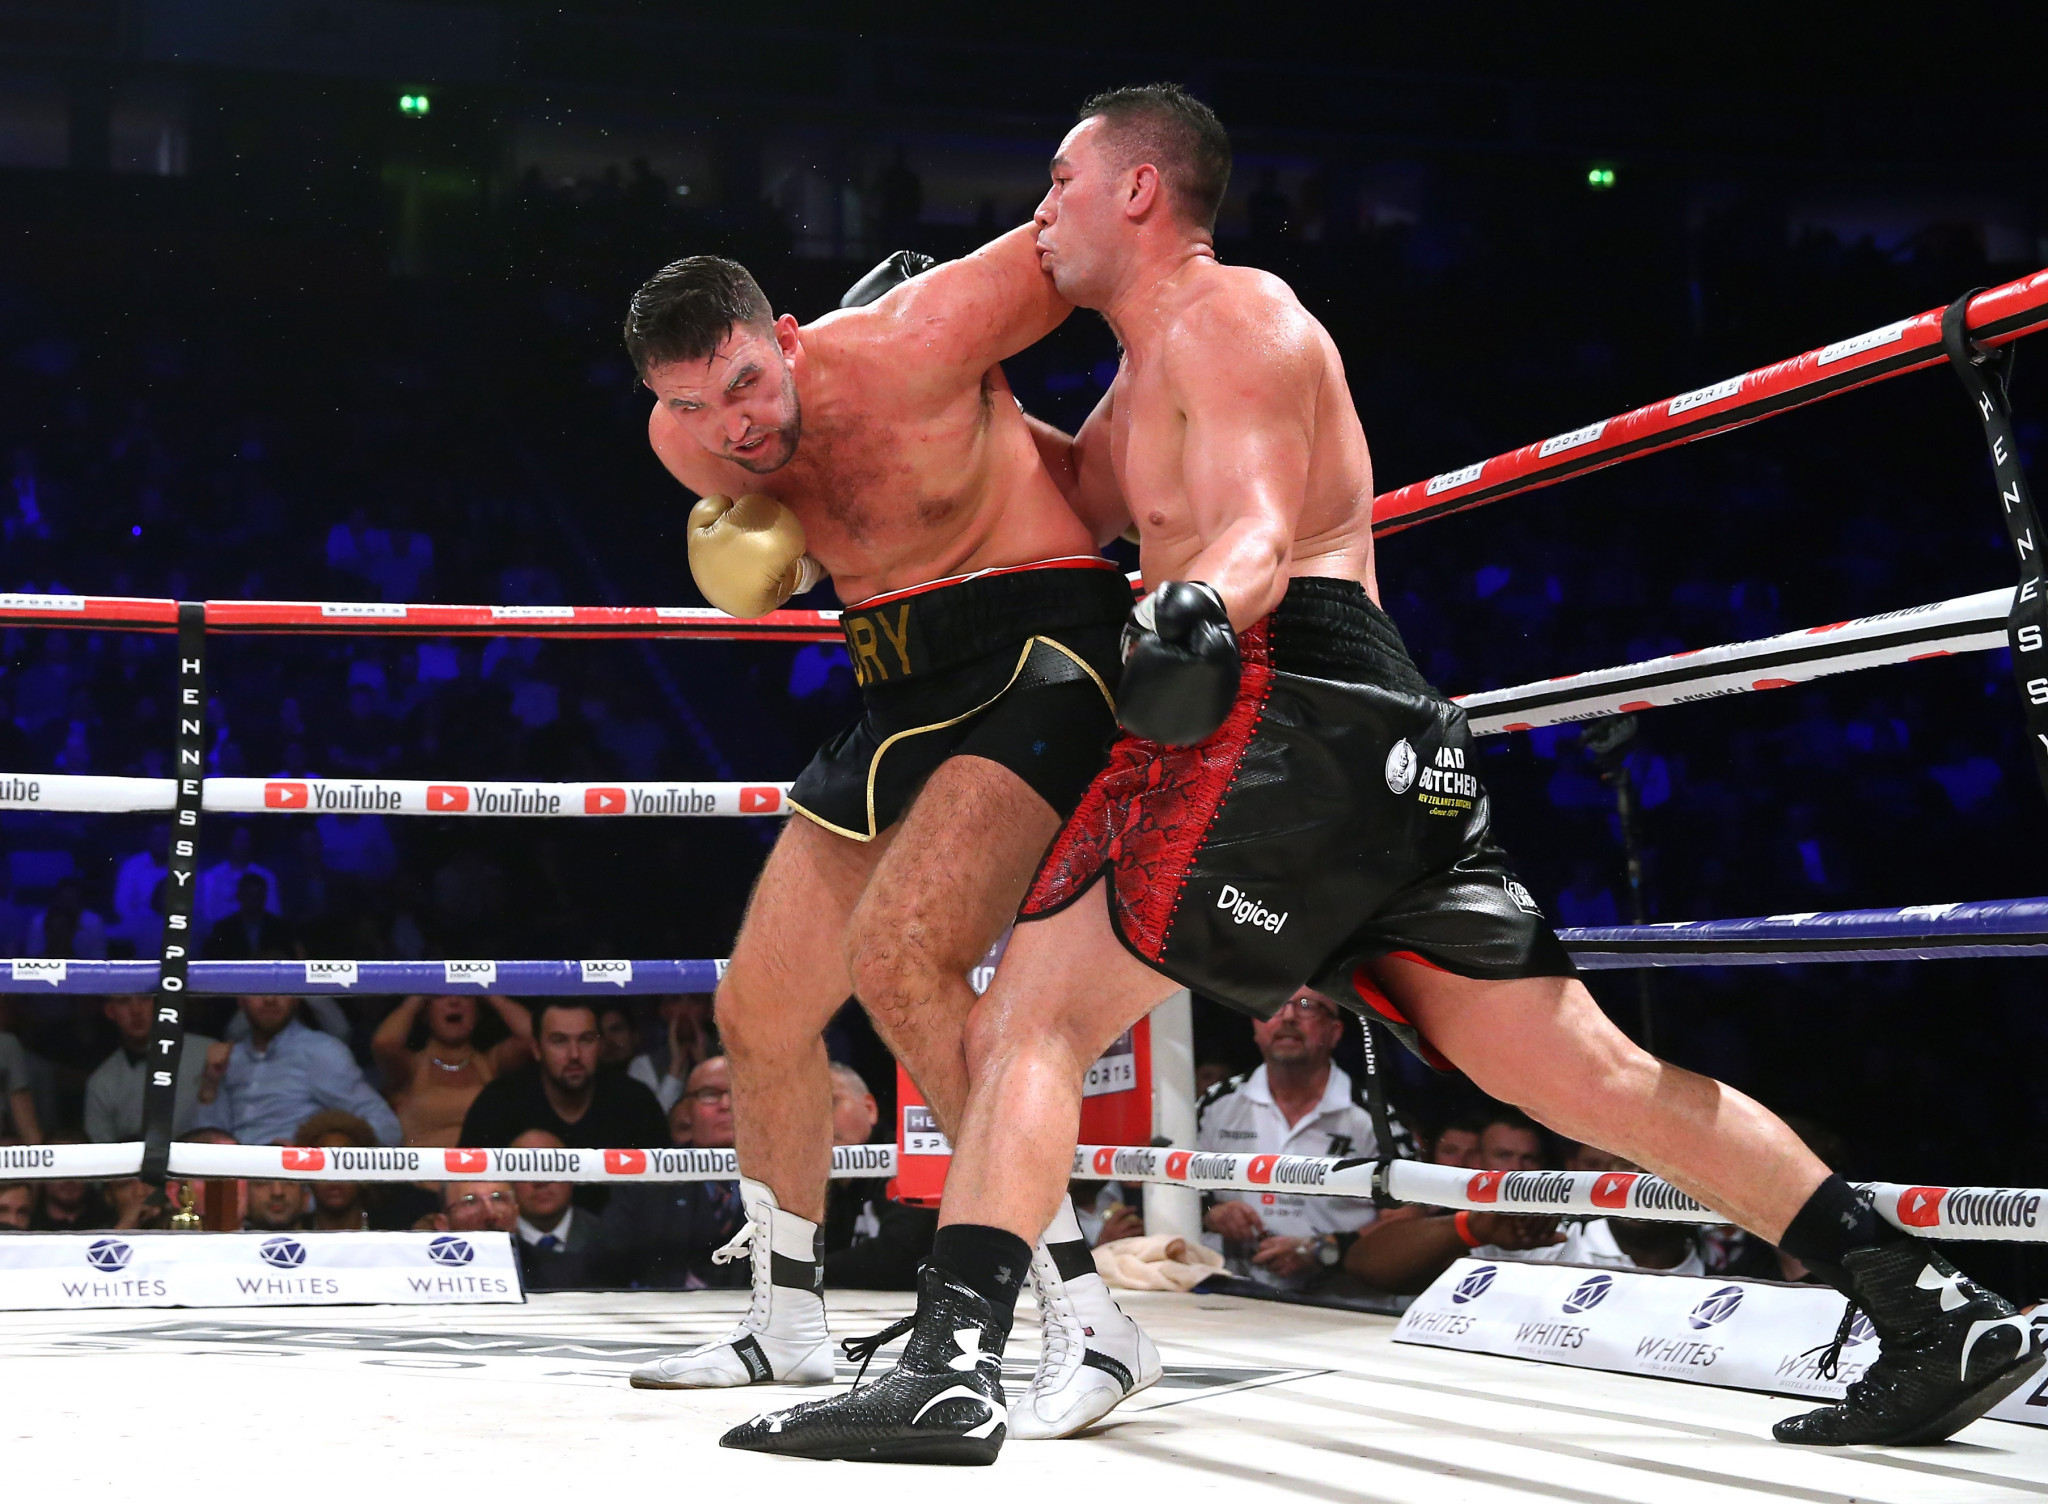 The fight between Joseph Parker, right, and Hughie Fury led to criticism of judging ©Getty Images